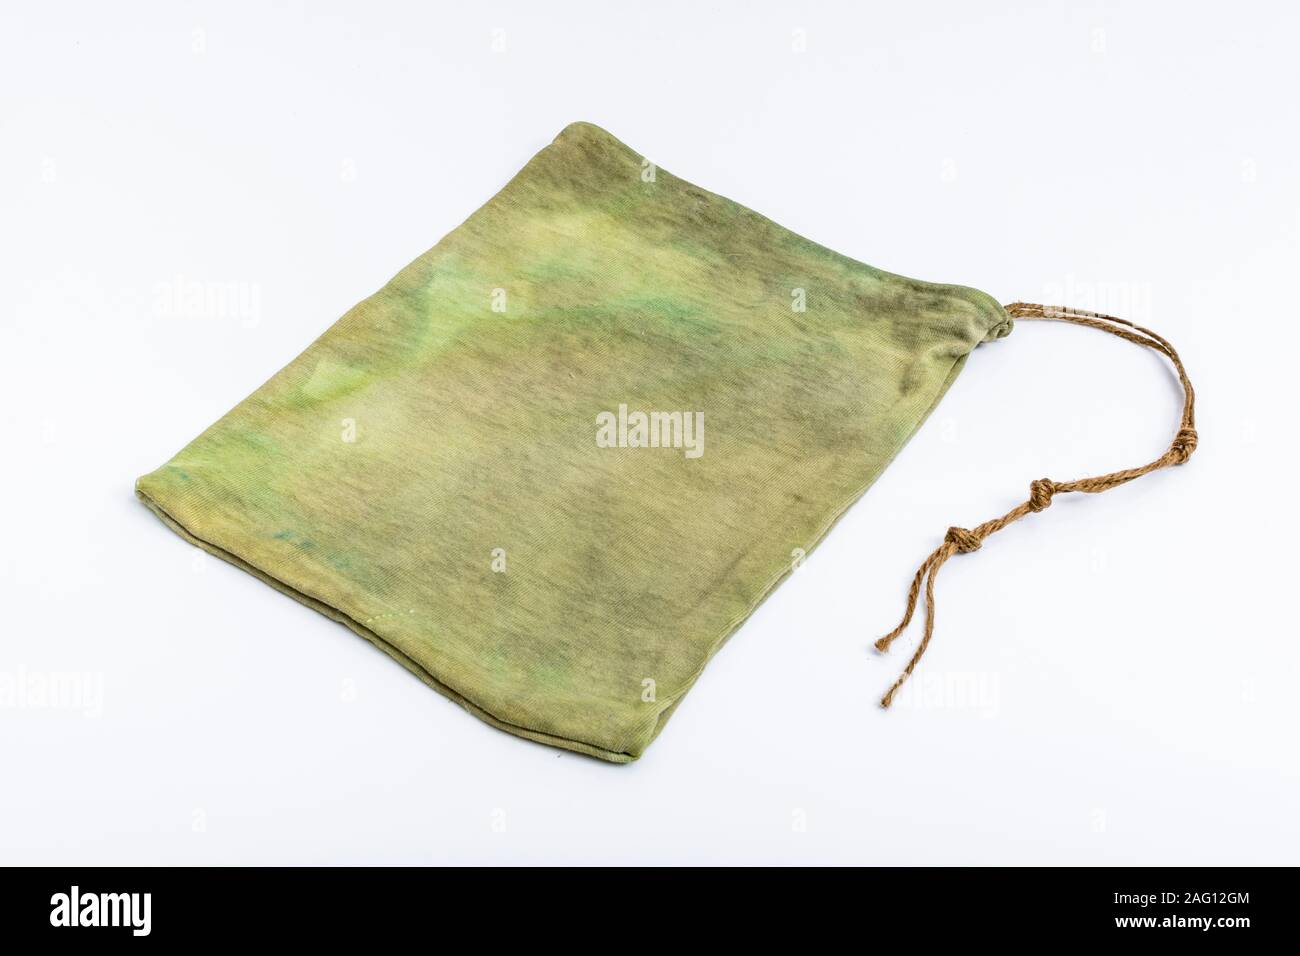 Small rustic possibles bag / ditty bag on off-white plain background. Metaphor survival skills, survival knowledge, bushcraft. Stock Photo